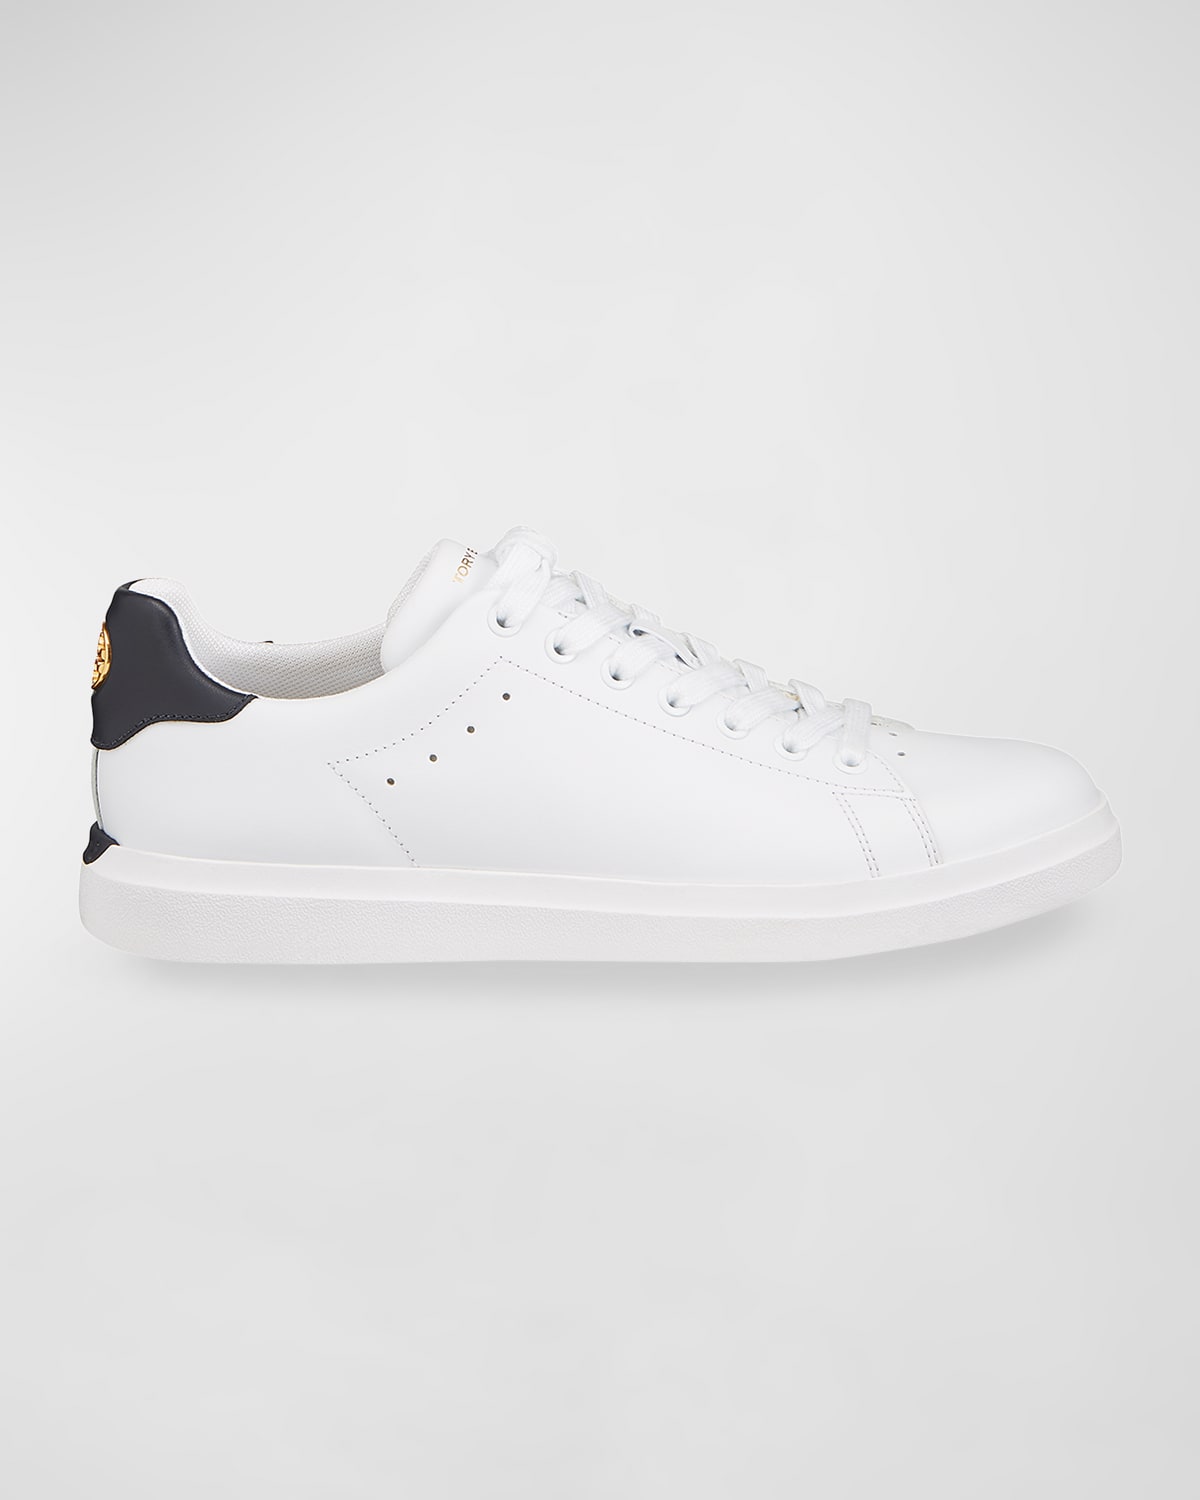 Tory Burch Howell T-Saddle Court Sneakers | Neiman Marcus